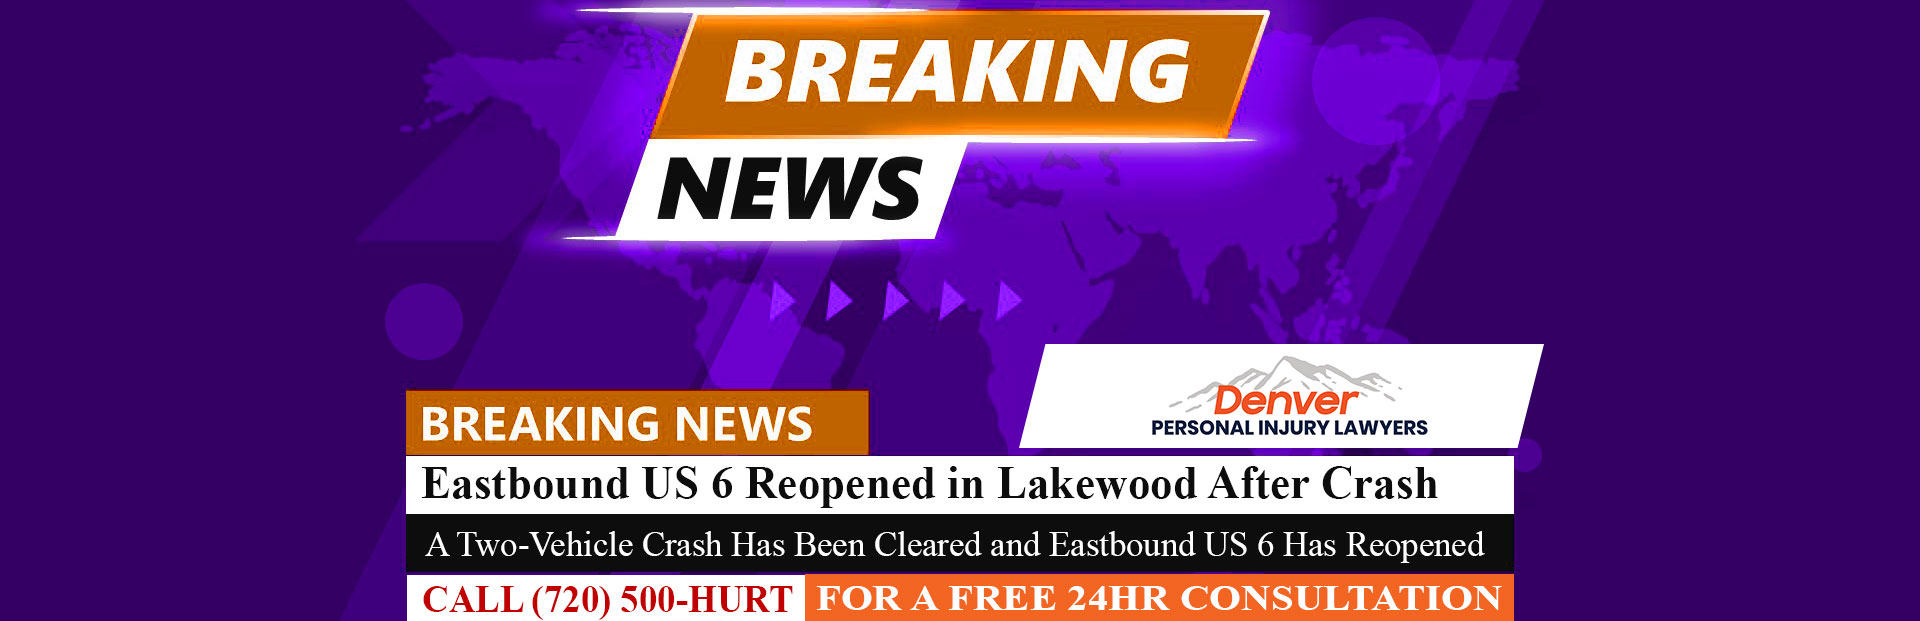 [11-28-22] Eastbound US 6 Reopened in Lakewood After Crash